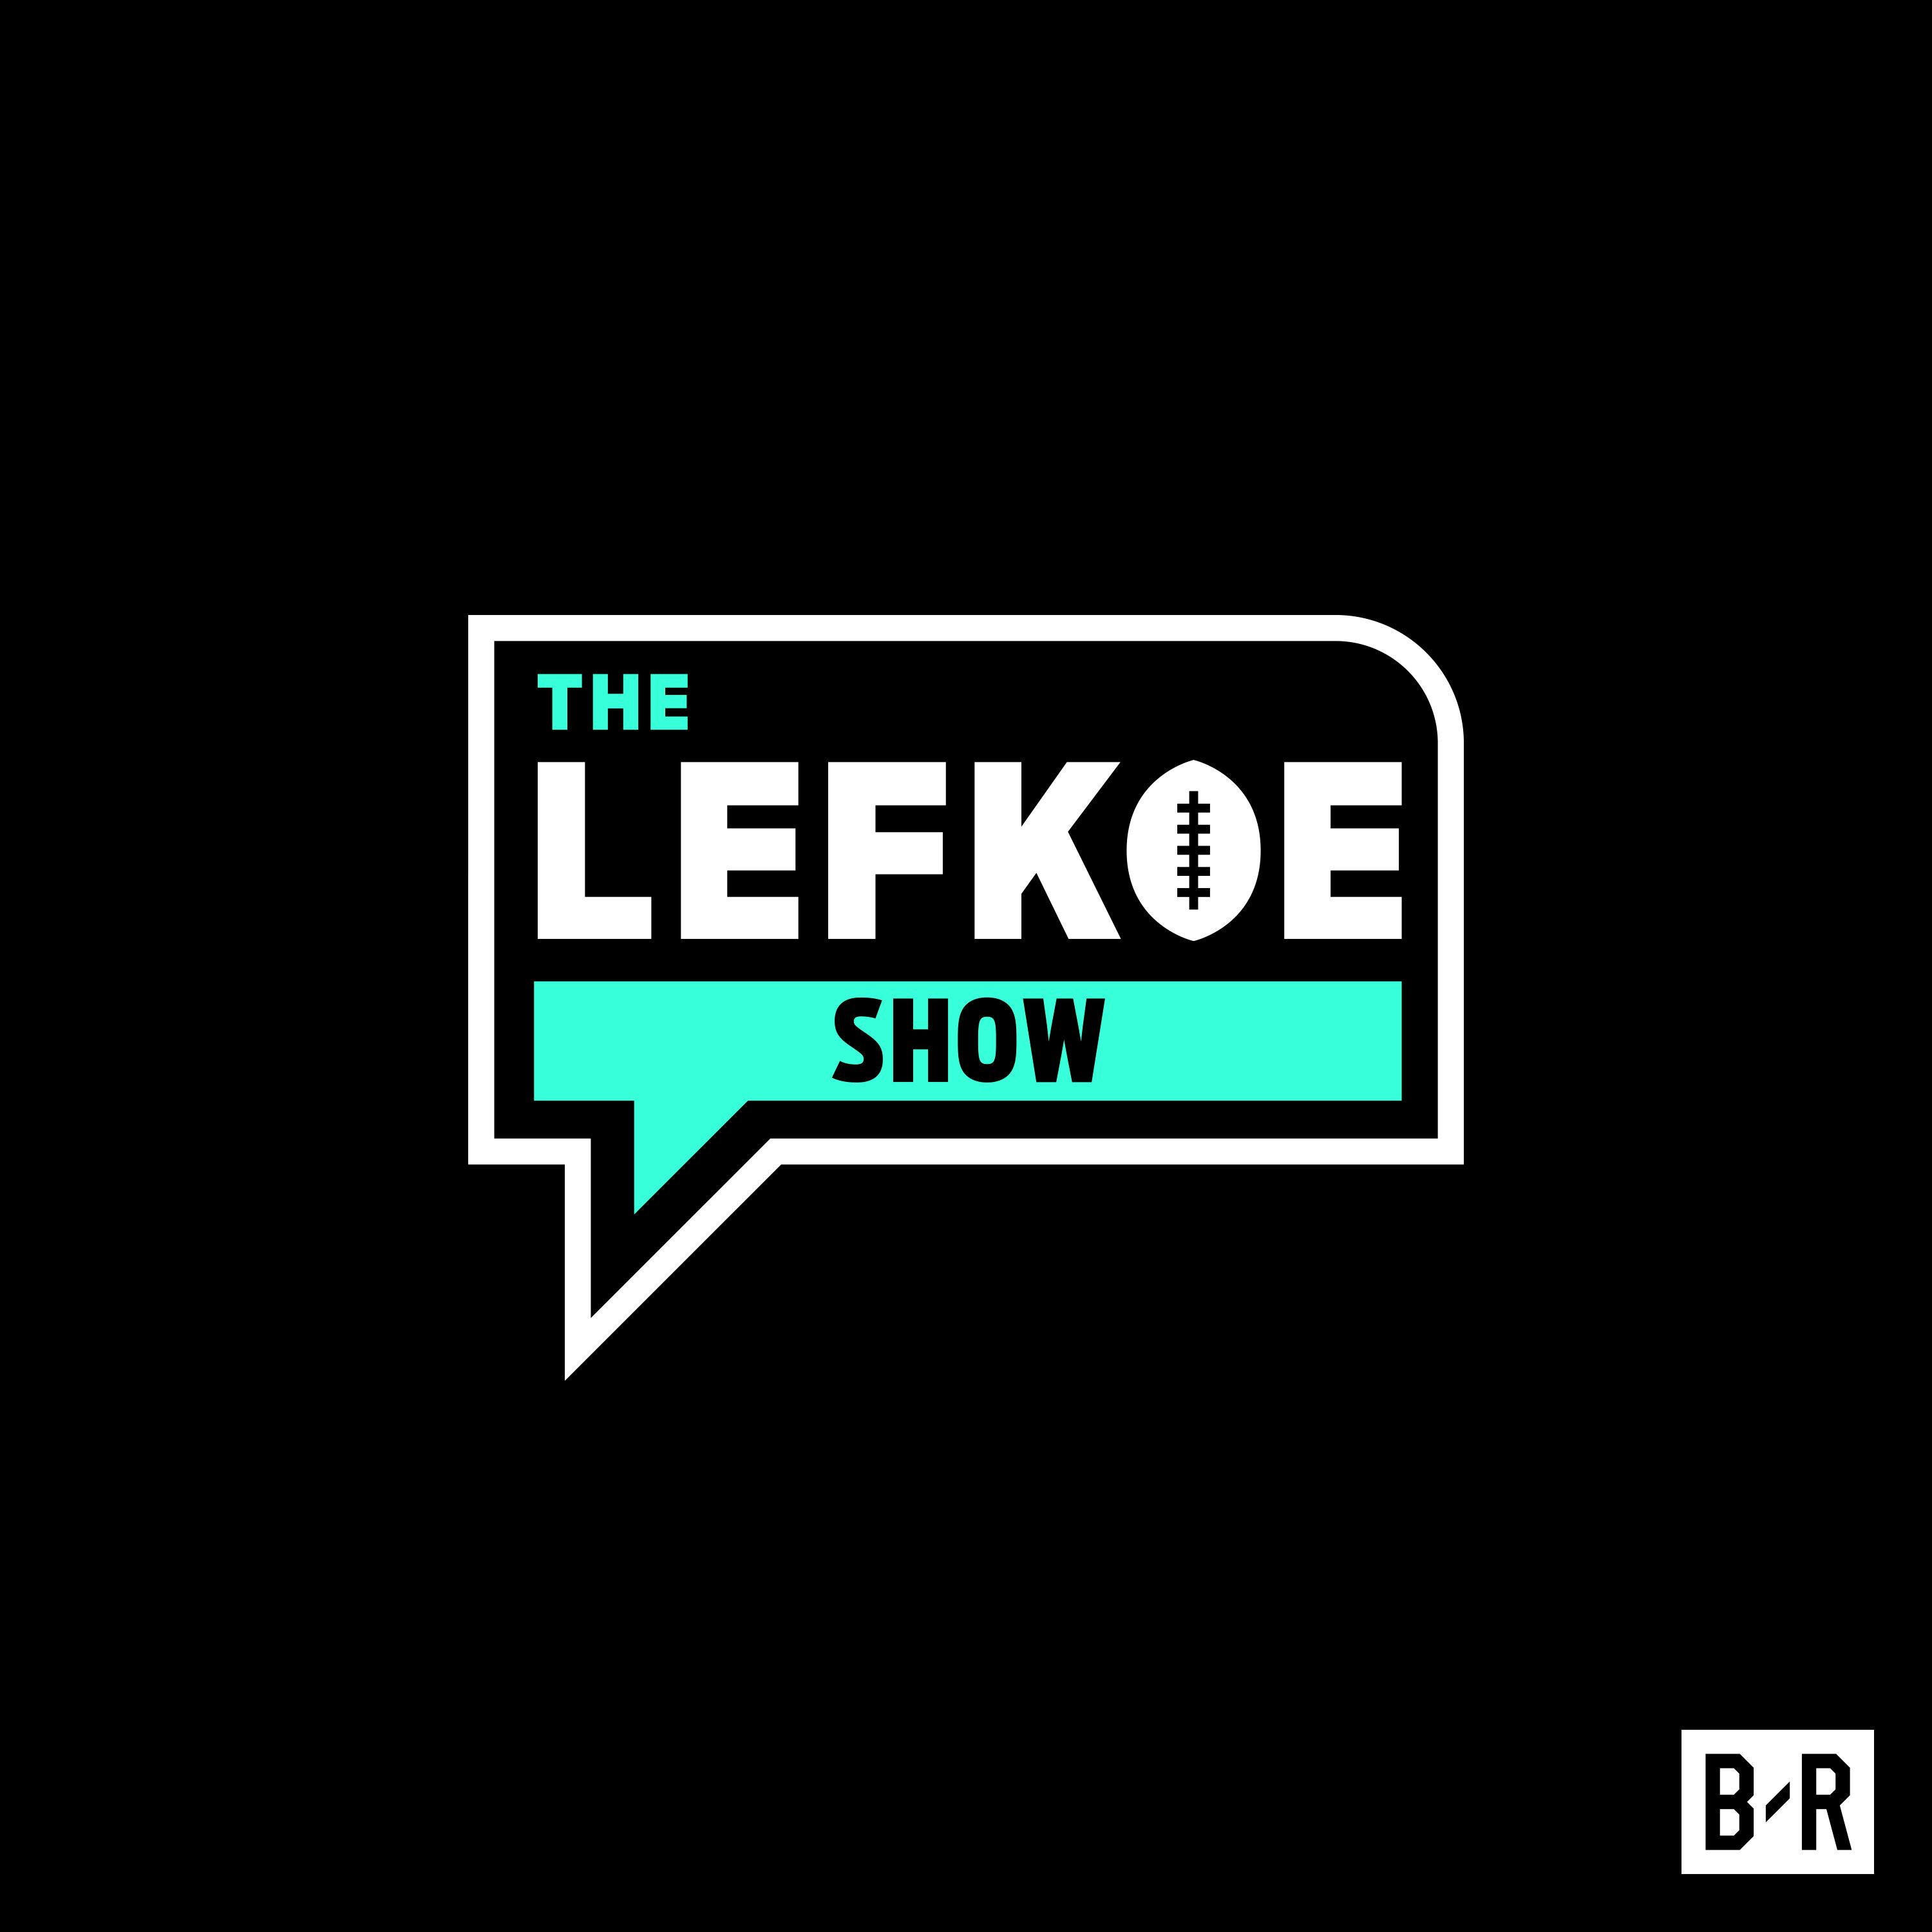 Lefkoe on Rodgers Saga, NBA MVP Race, Giants-Eagles Rivalry Madness, and More! | The Lefkoe Show